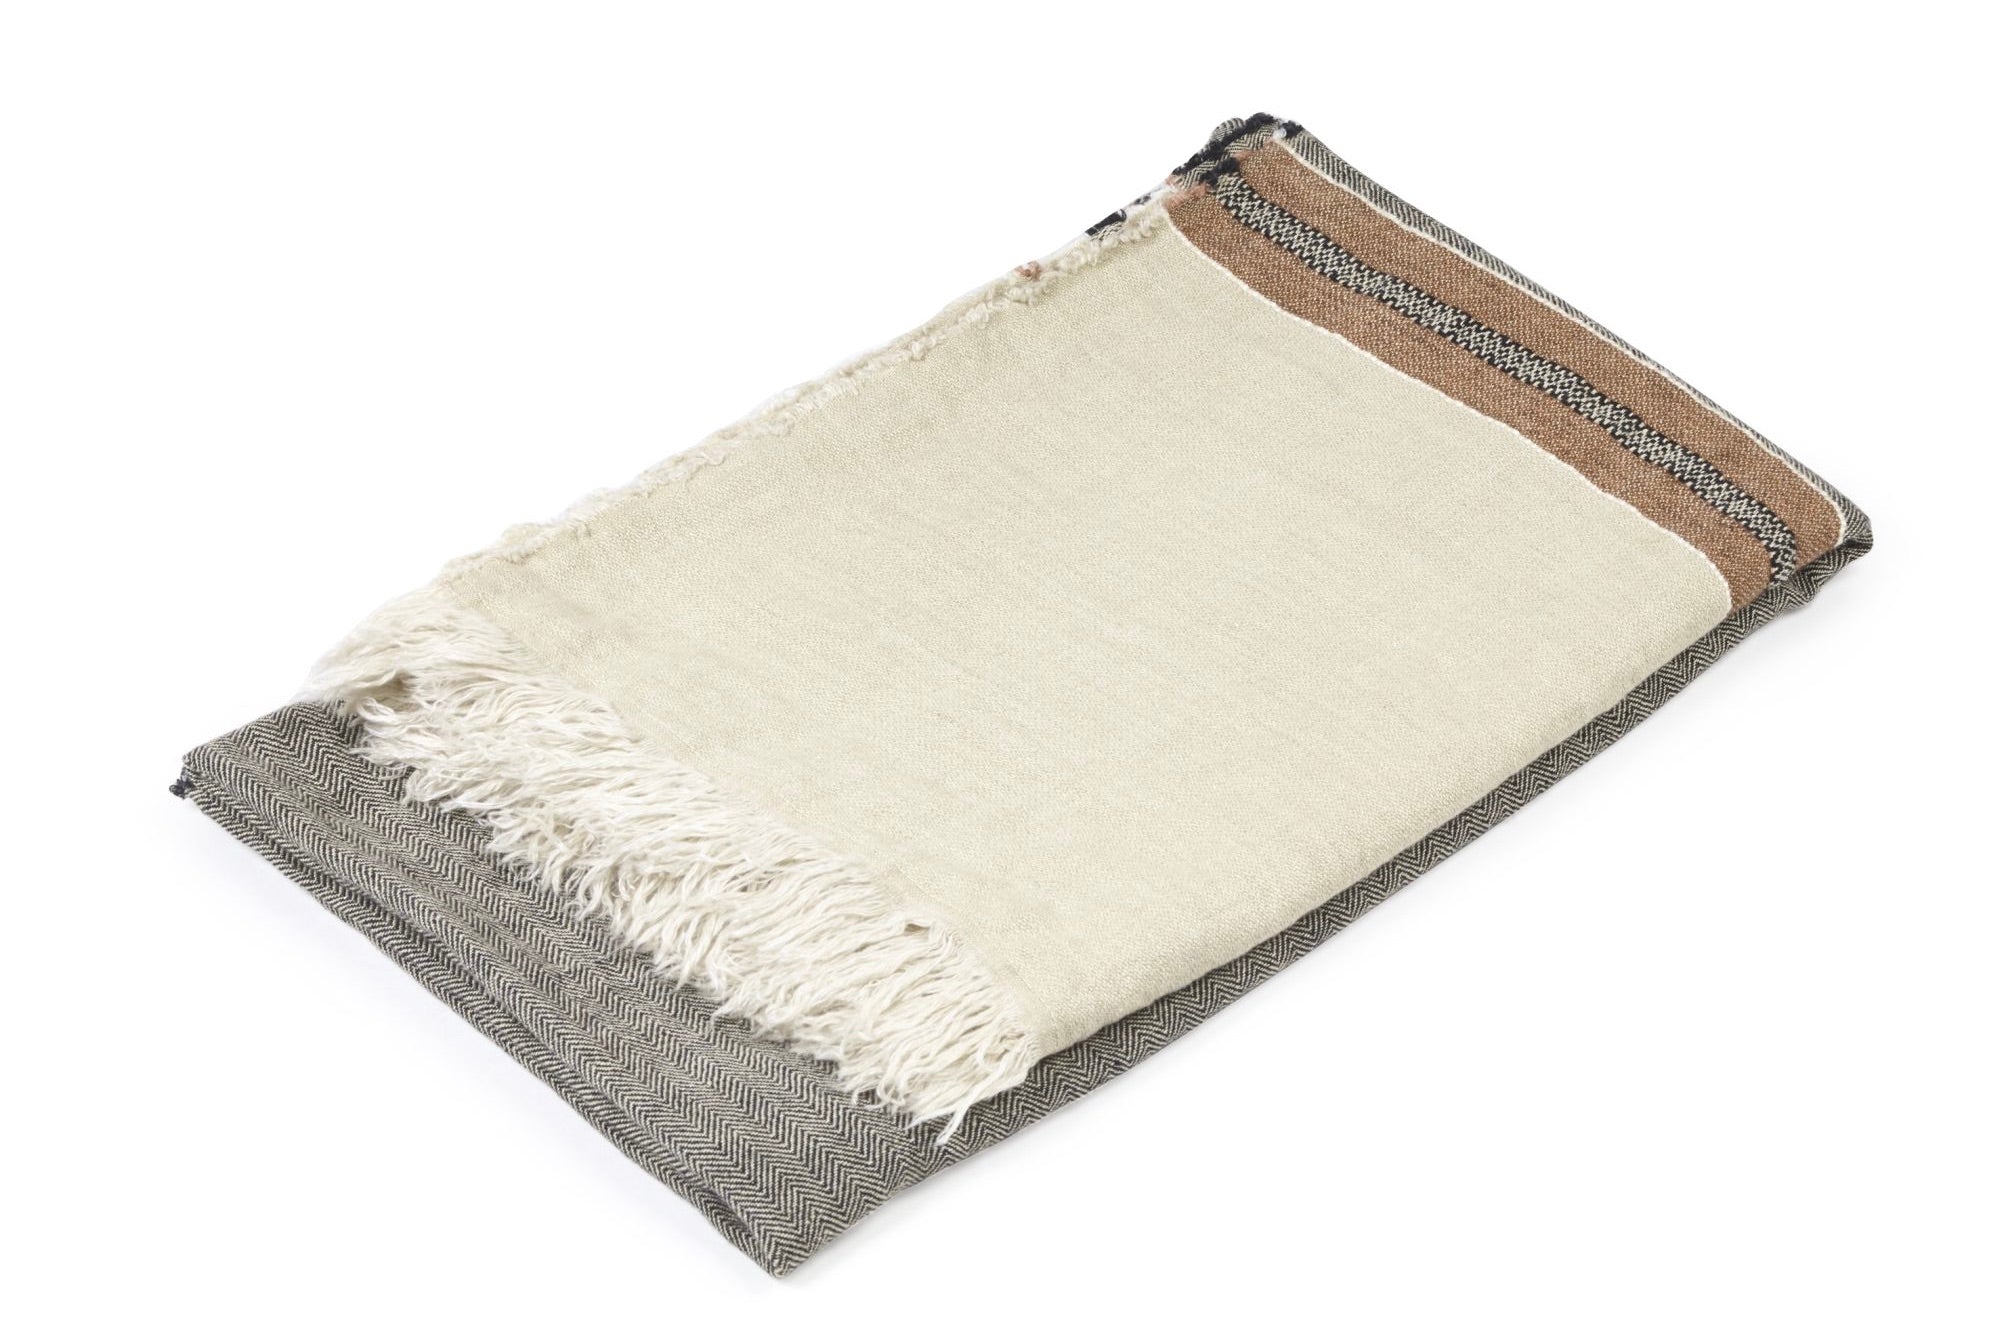 Linen towel or table runner "Beeswax" 110x180